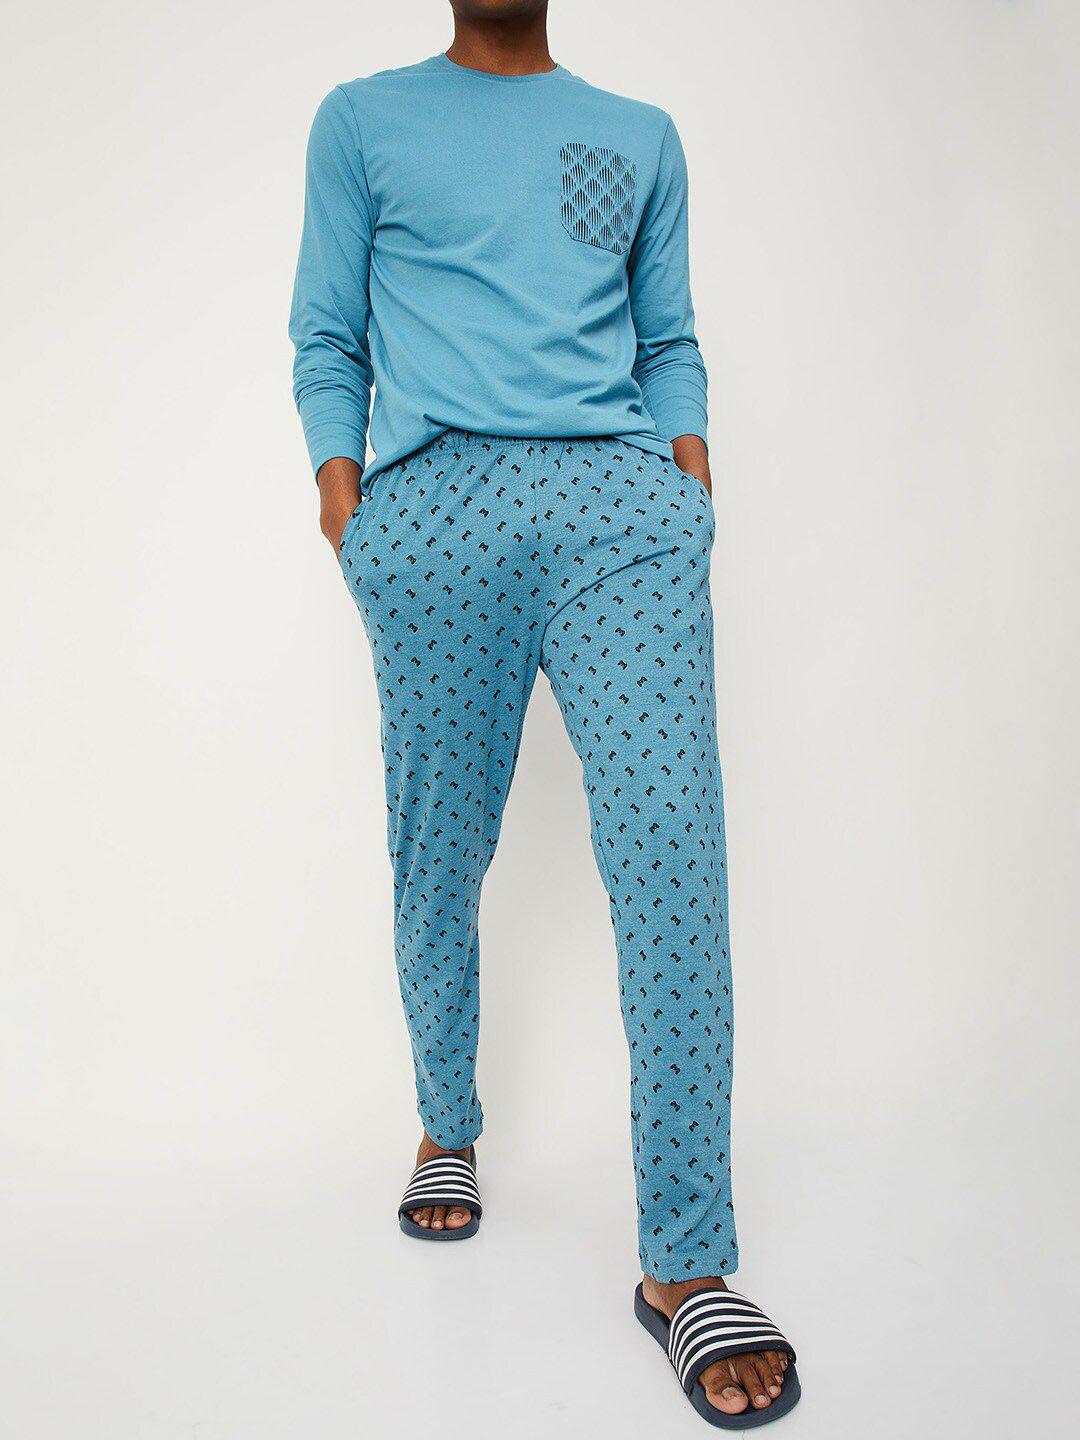 max men blue all-over printed lounge pants